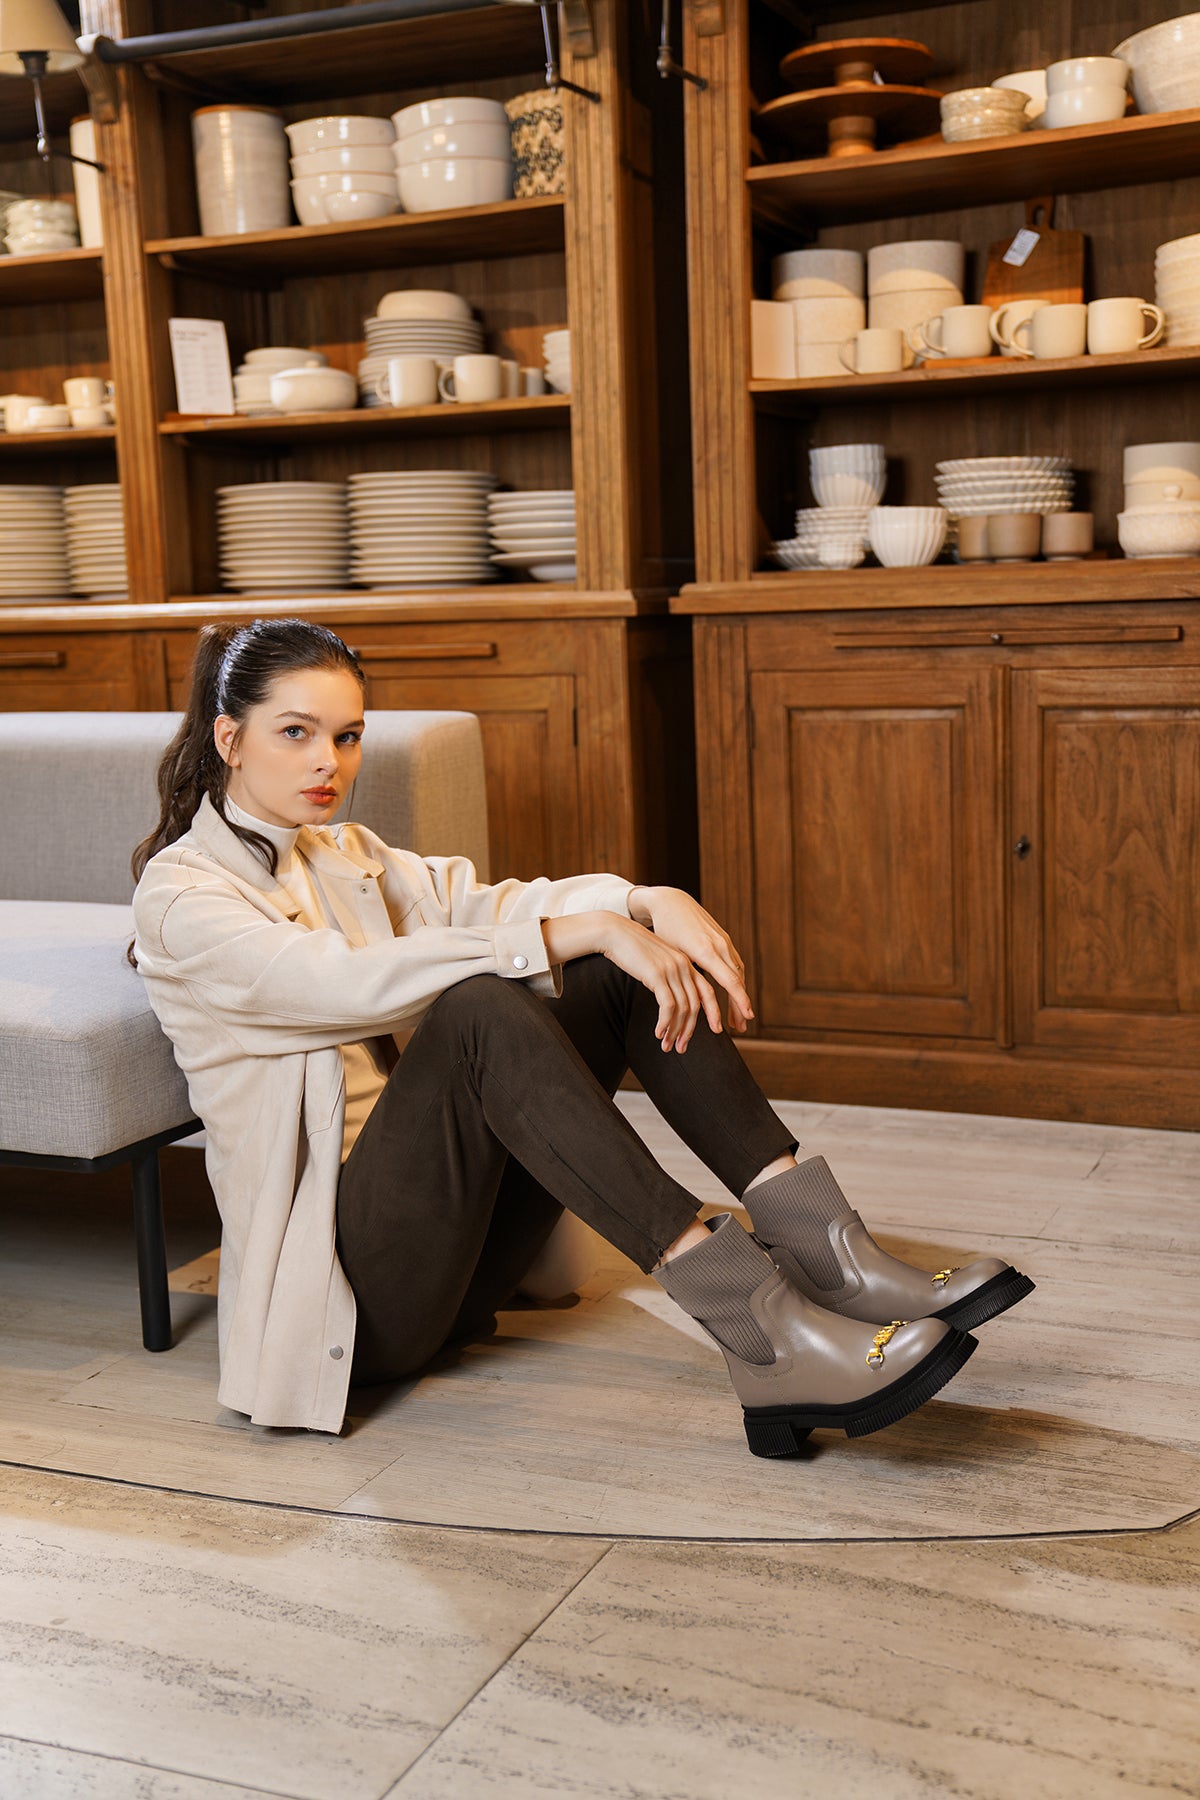 Chelsea Boots - Taupe